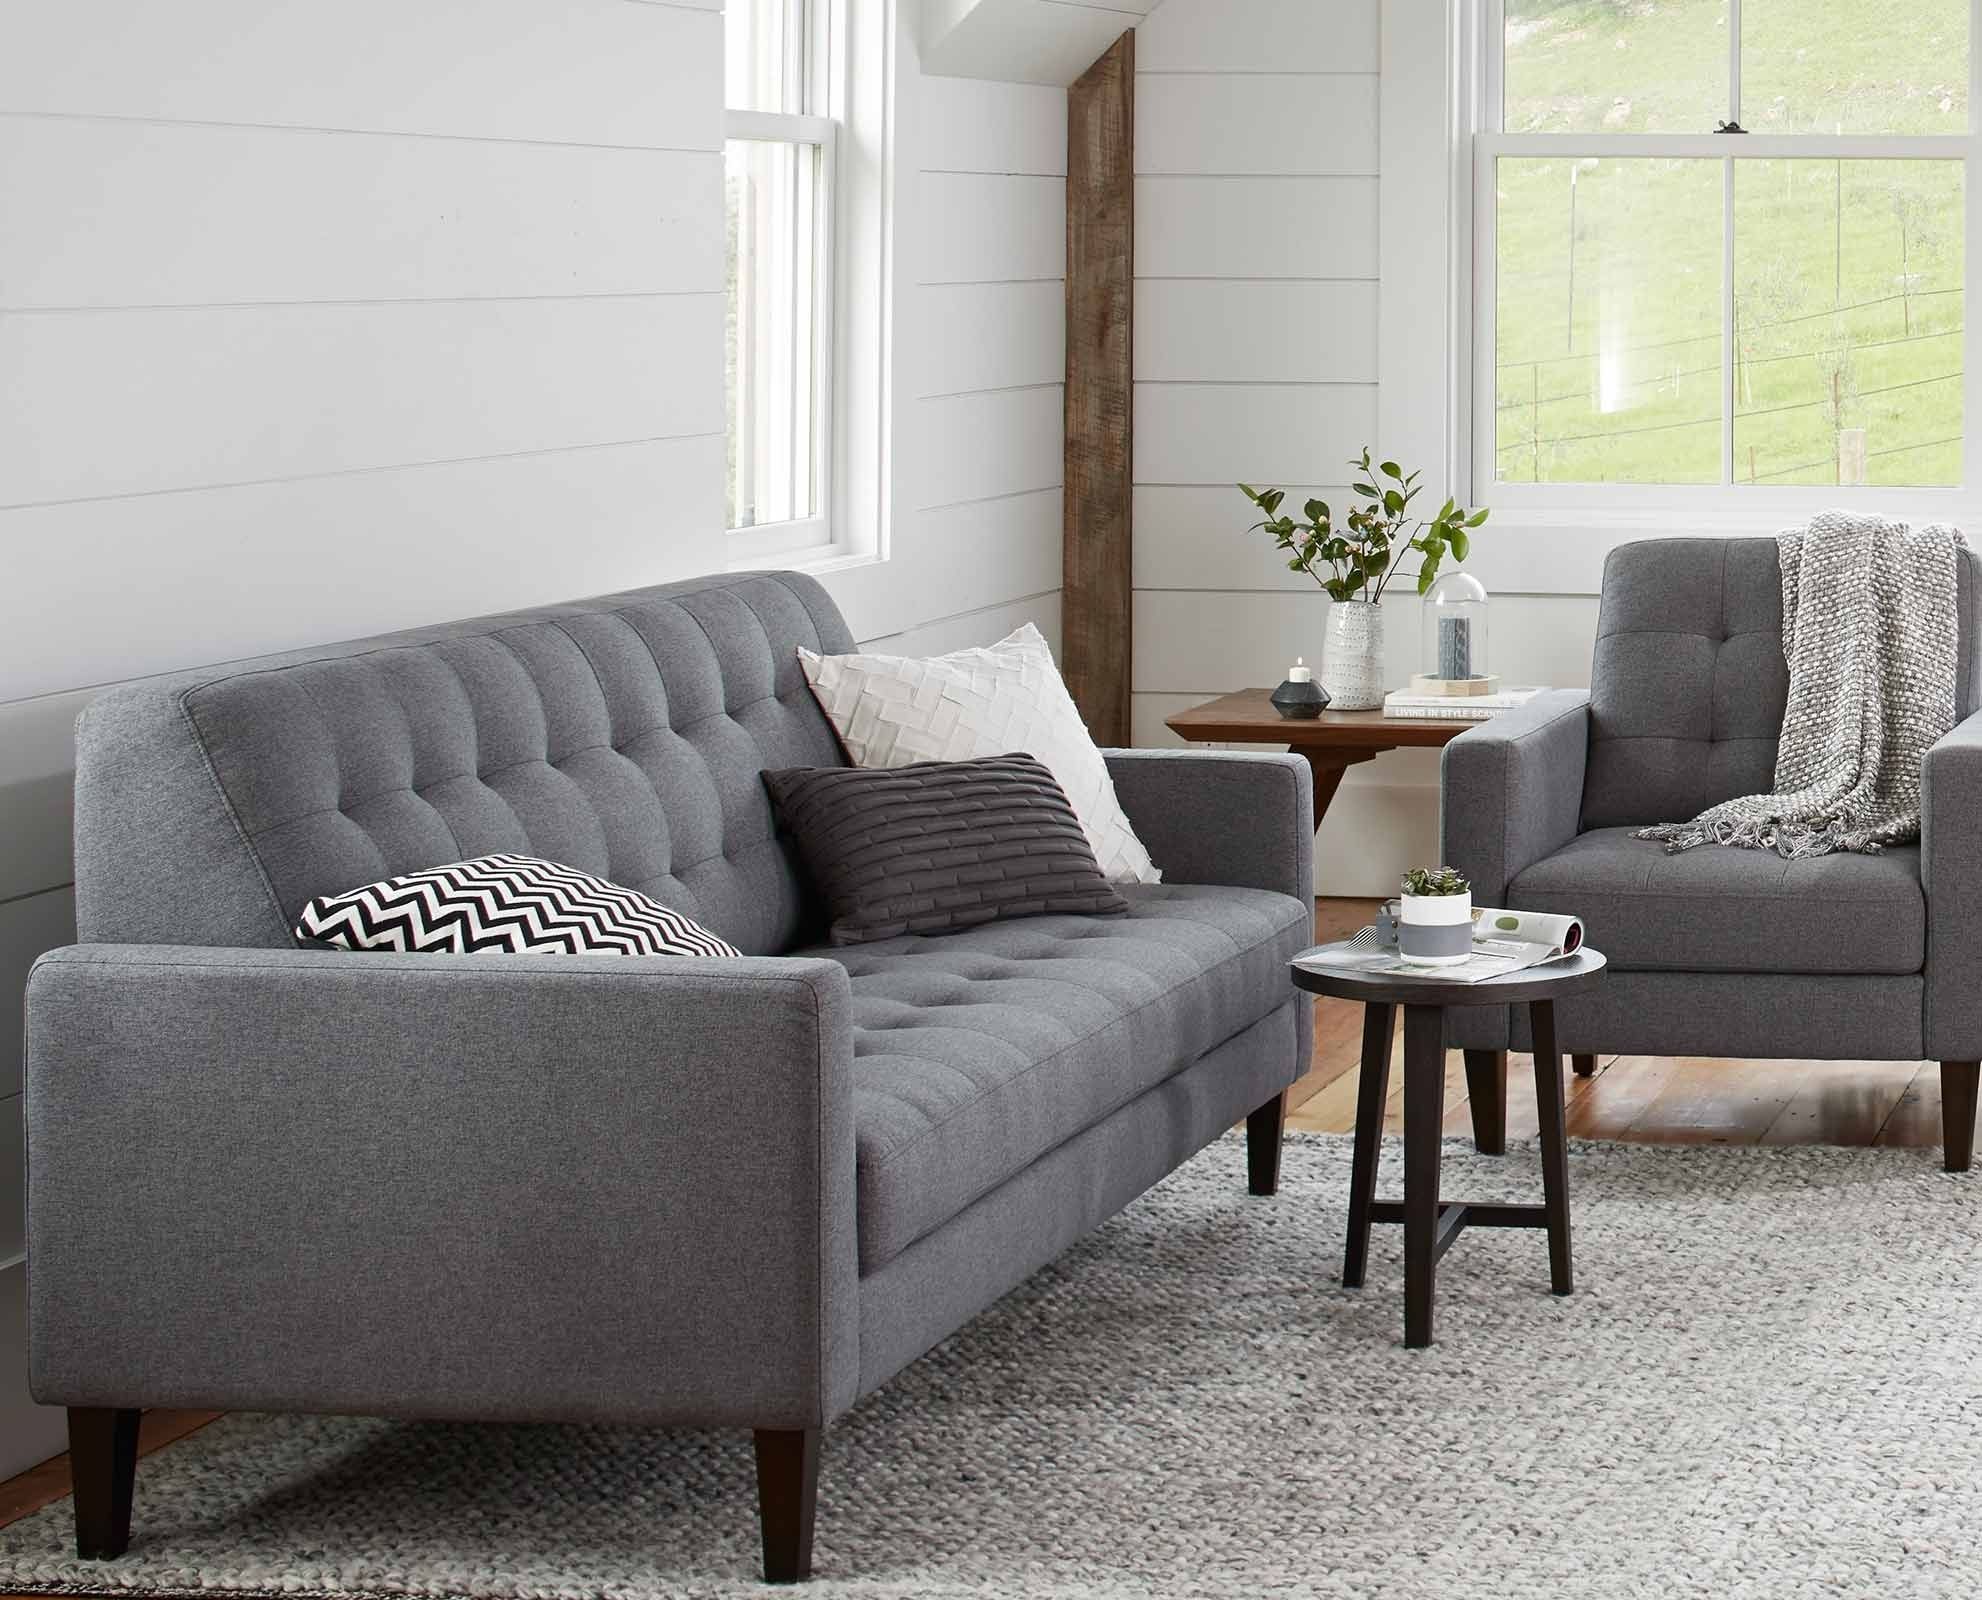 Furniture: Tillary Sofa | West Elm Sectional Sofa | West Elm Sofa Beds Intended For West Elm Sectional Sofas (View 8 of 10)